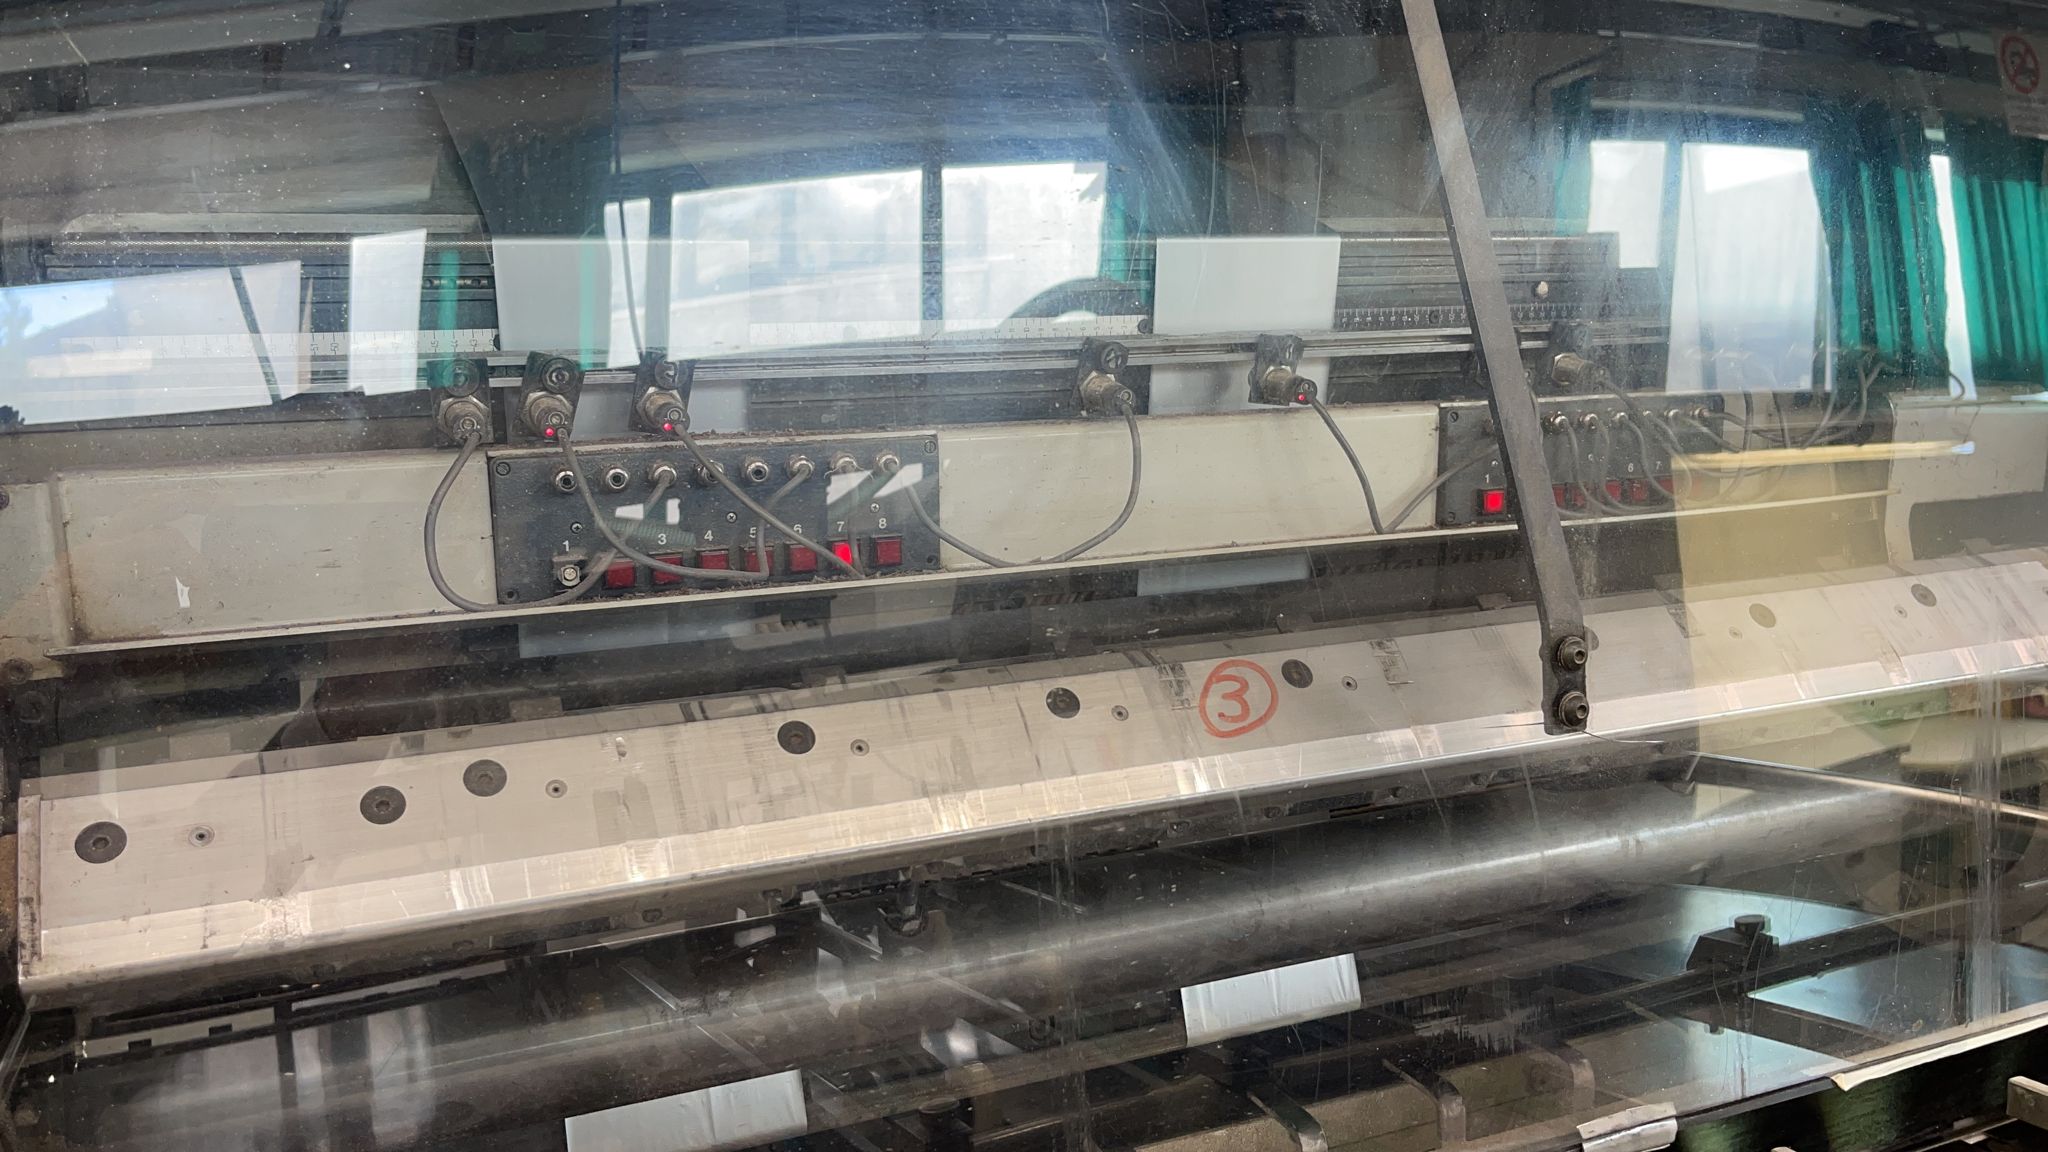 Bobst SP 126 BMA Year 1992 Size 